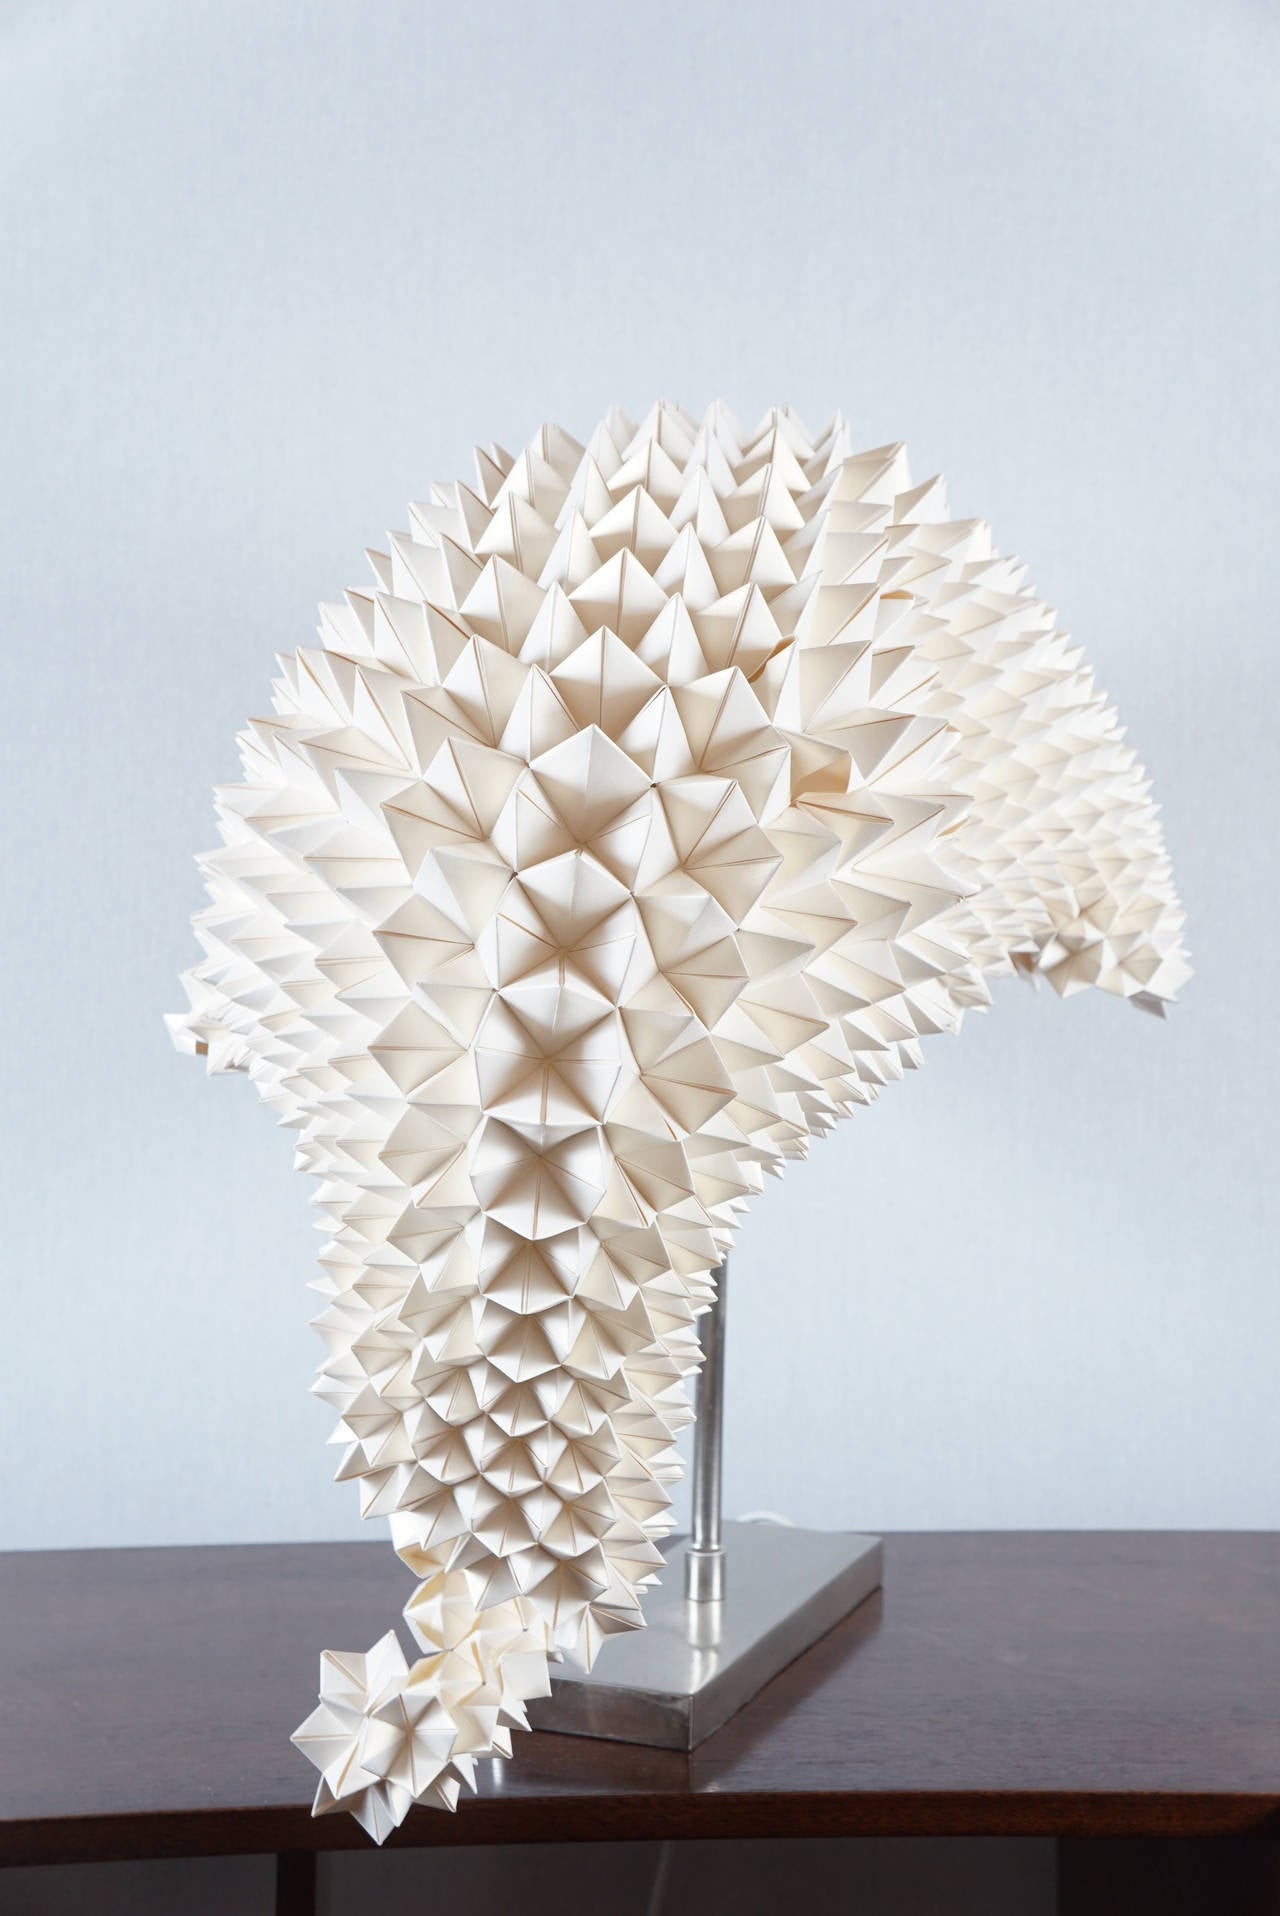 A Dragon's Tail Table Lamp designed by Luisa Robinson for Hive, constructed with folded paper.